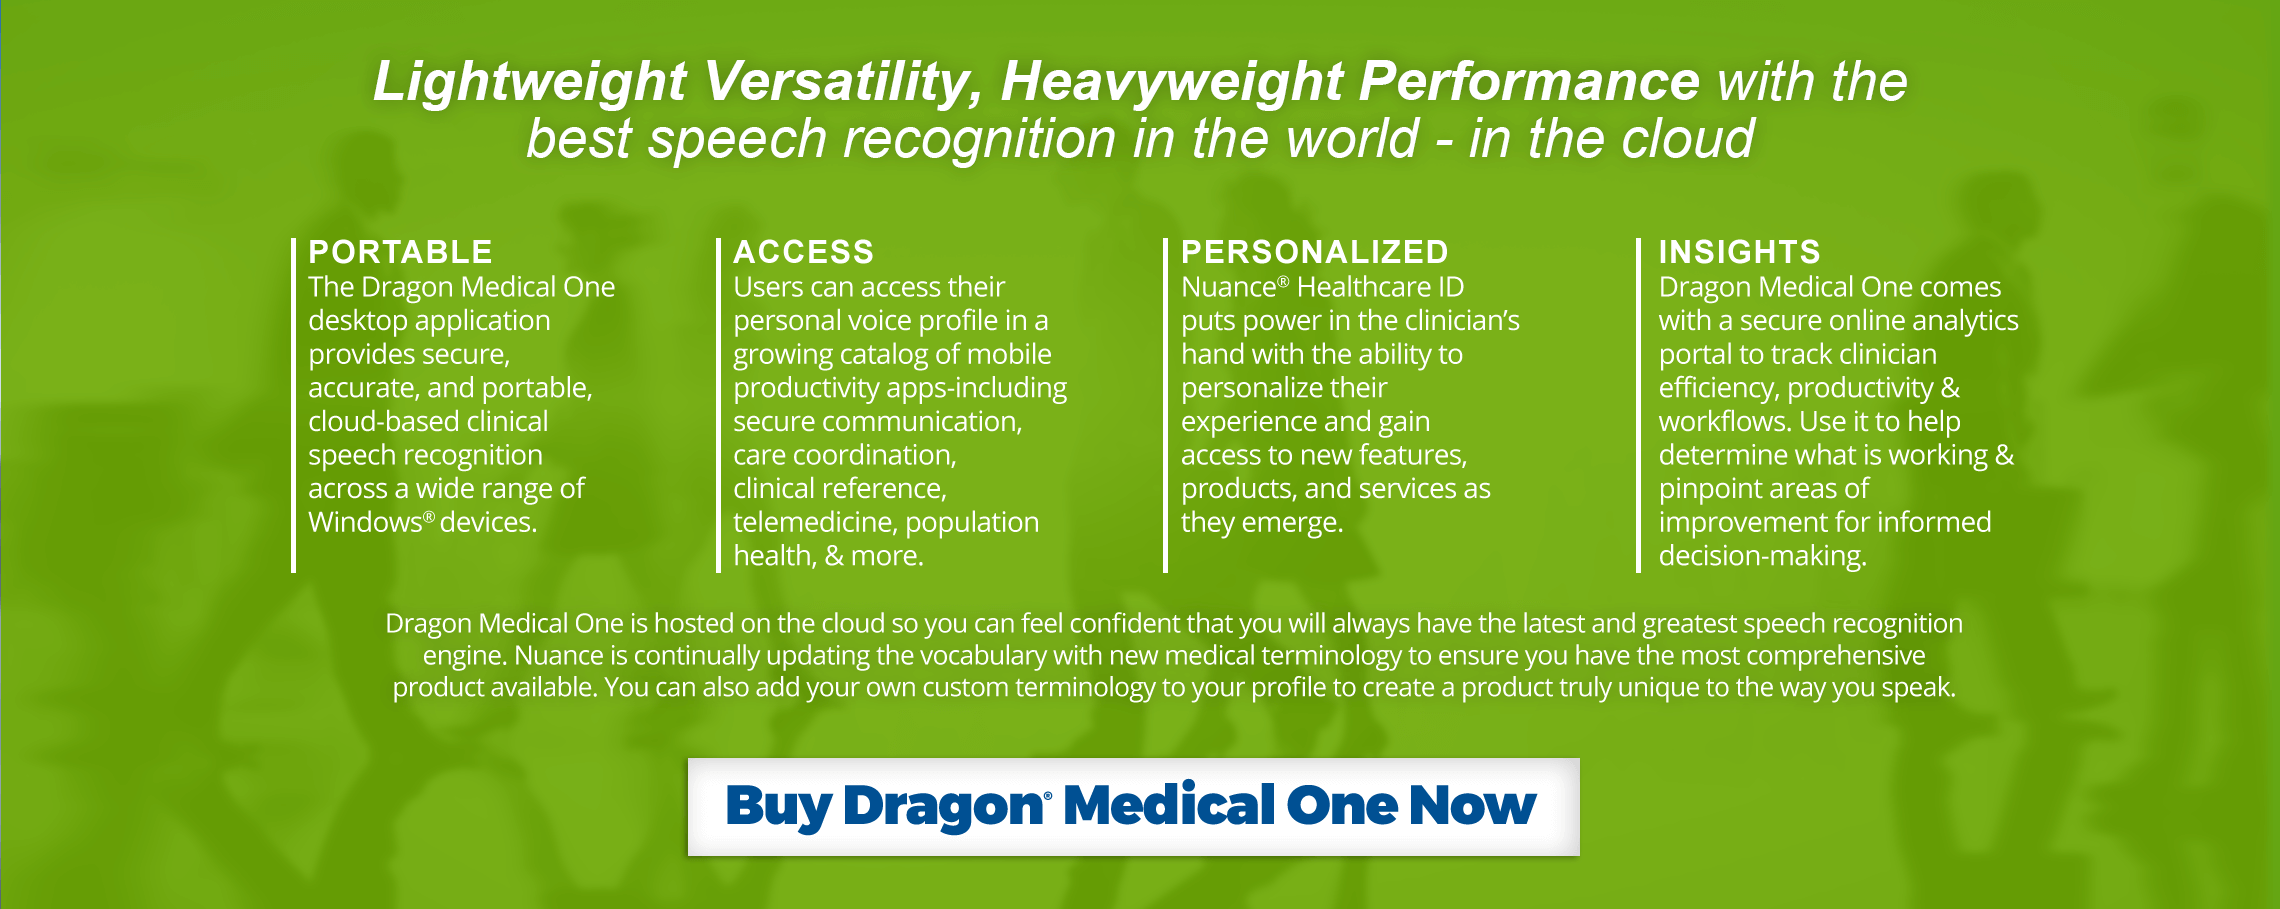 Dragon Medical One details the best speech recognition in the world - in the cloud.